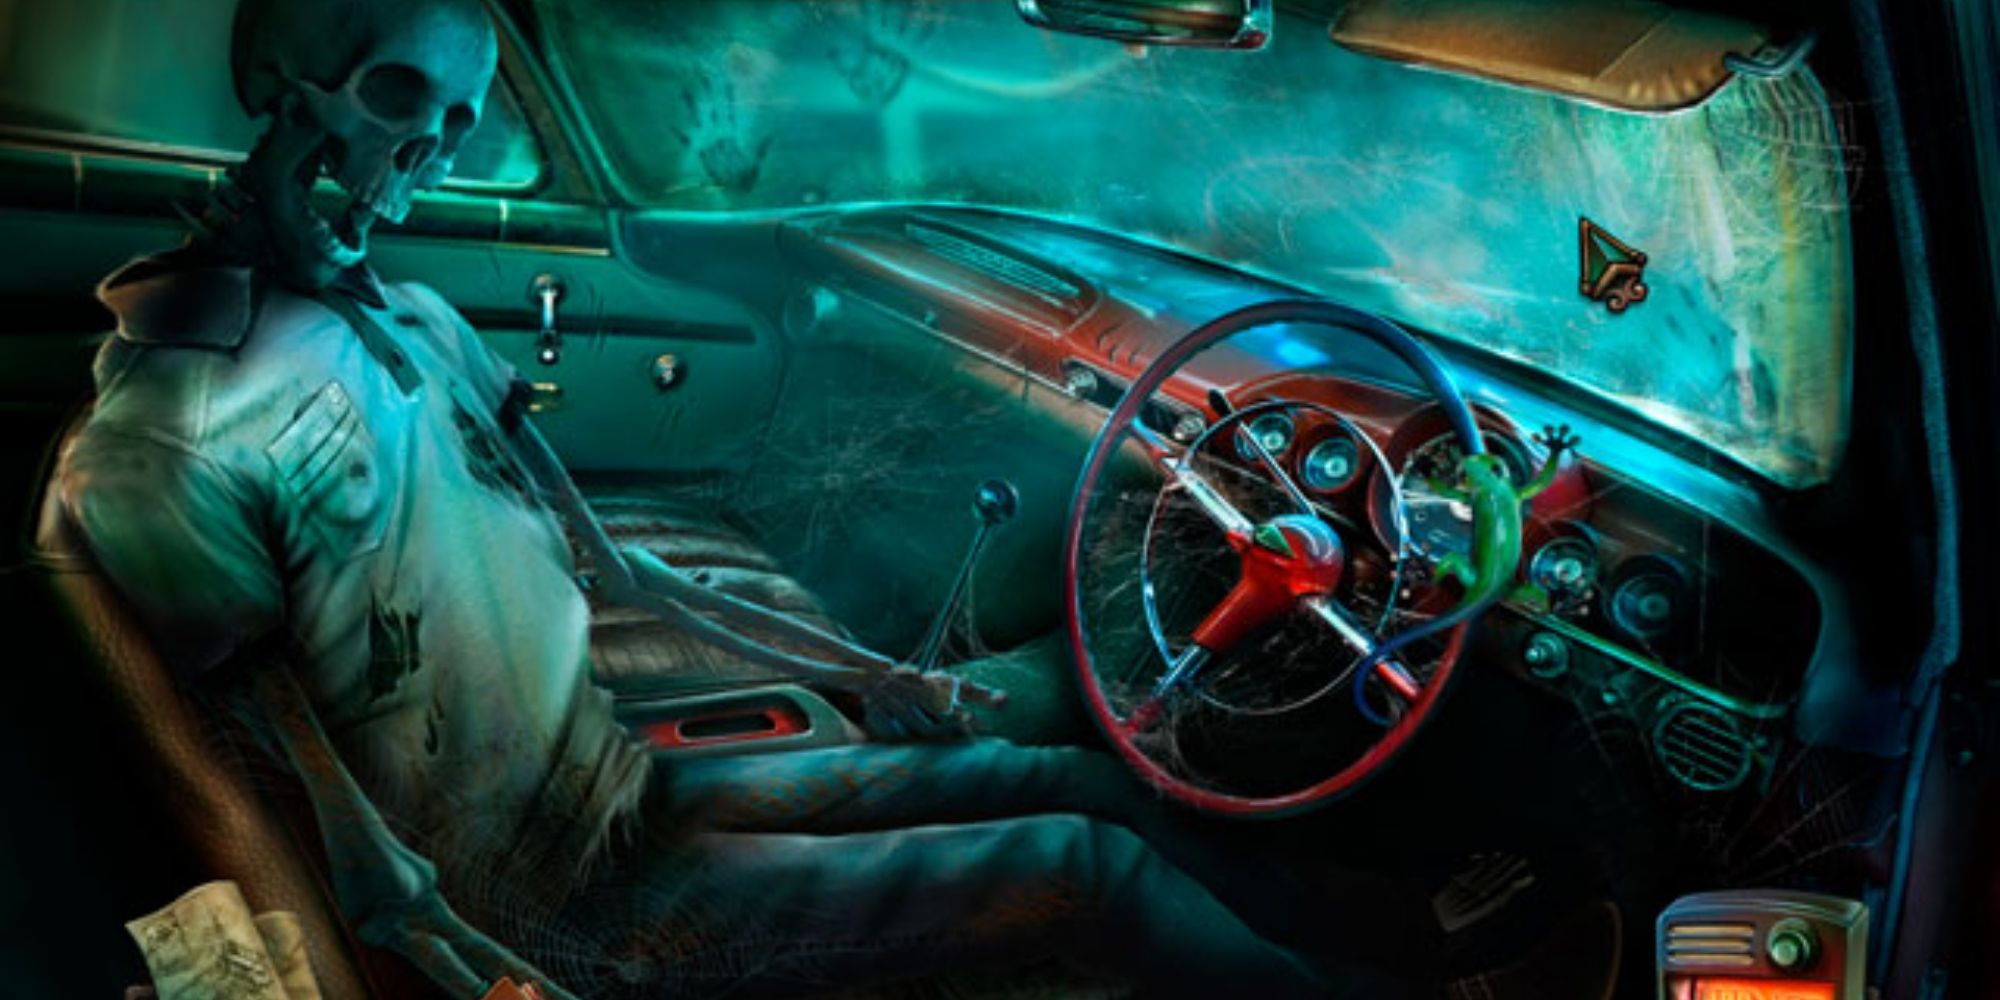 An abandoned car interior including a full skeleton in the seat